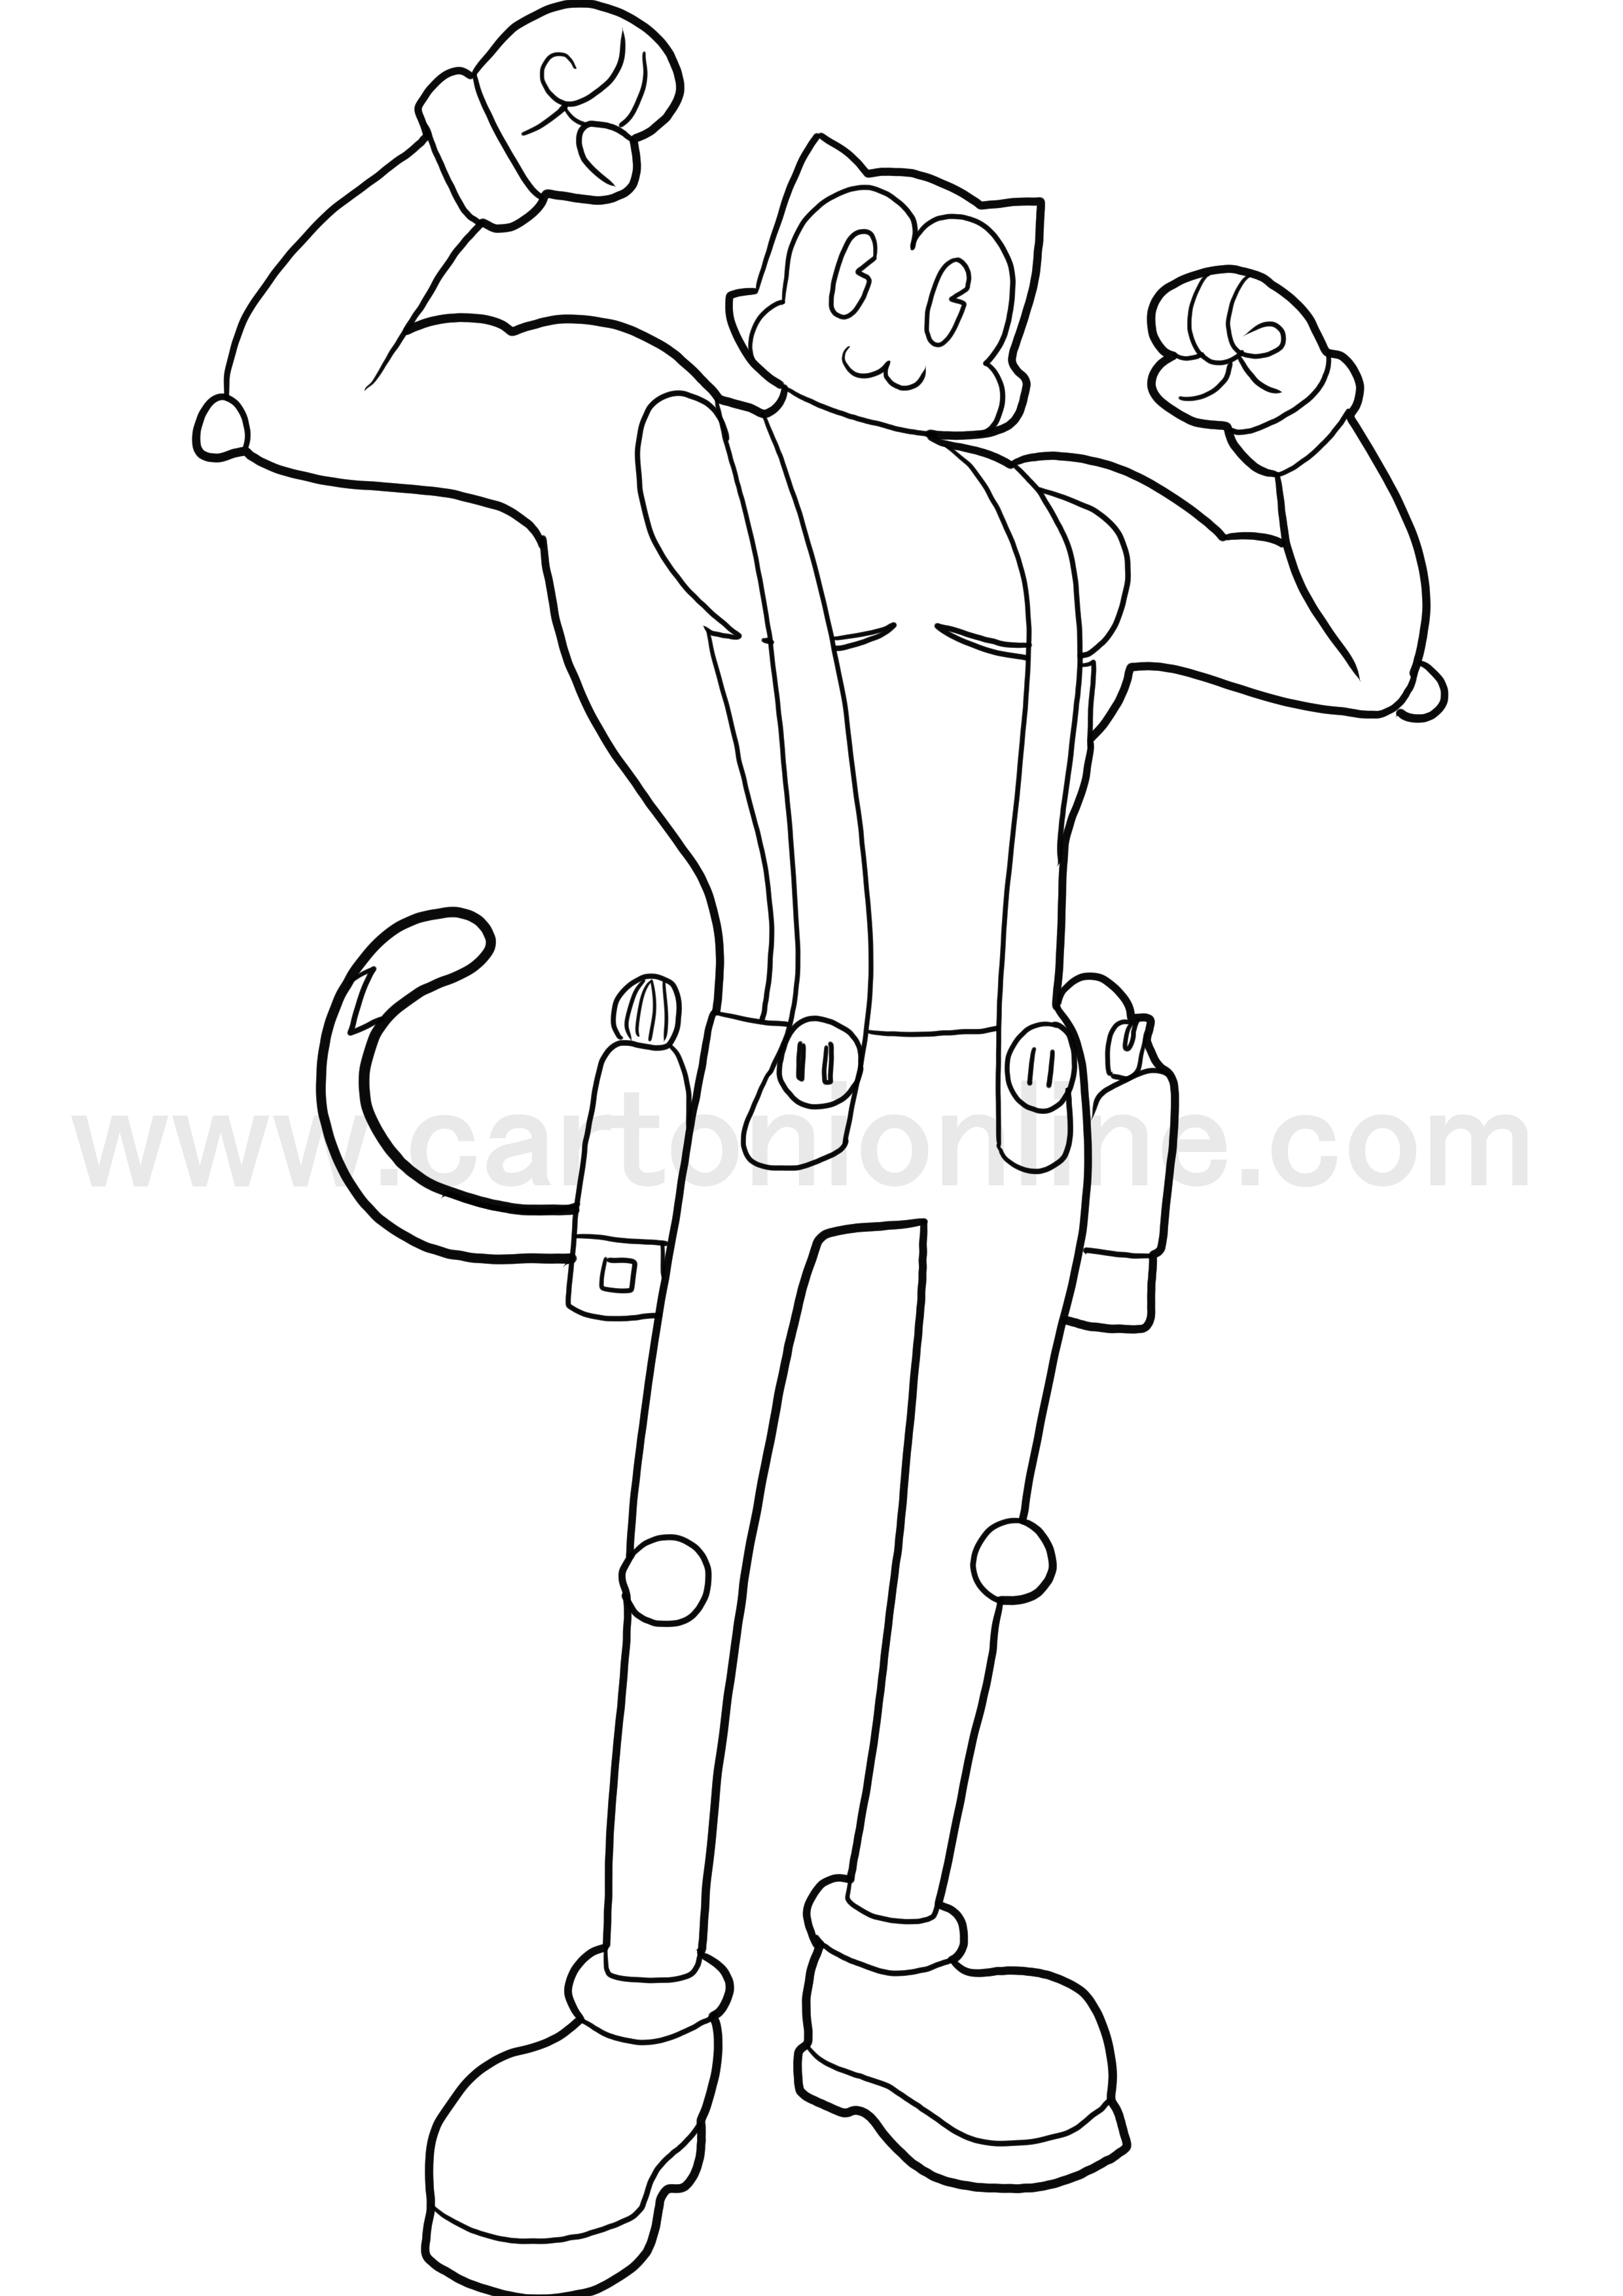 Toon Meowscles from Fortnite coloring page to print and coloring